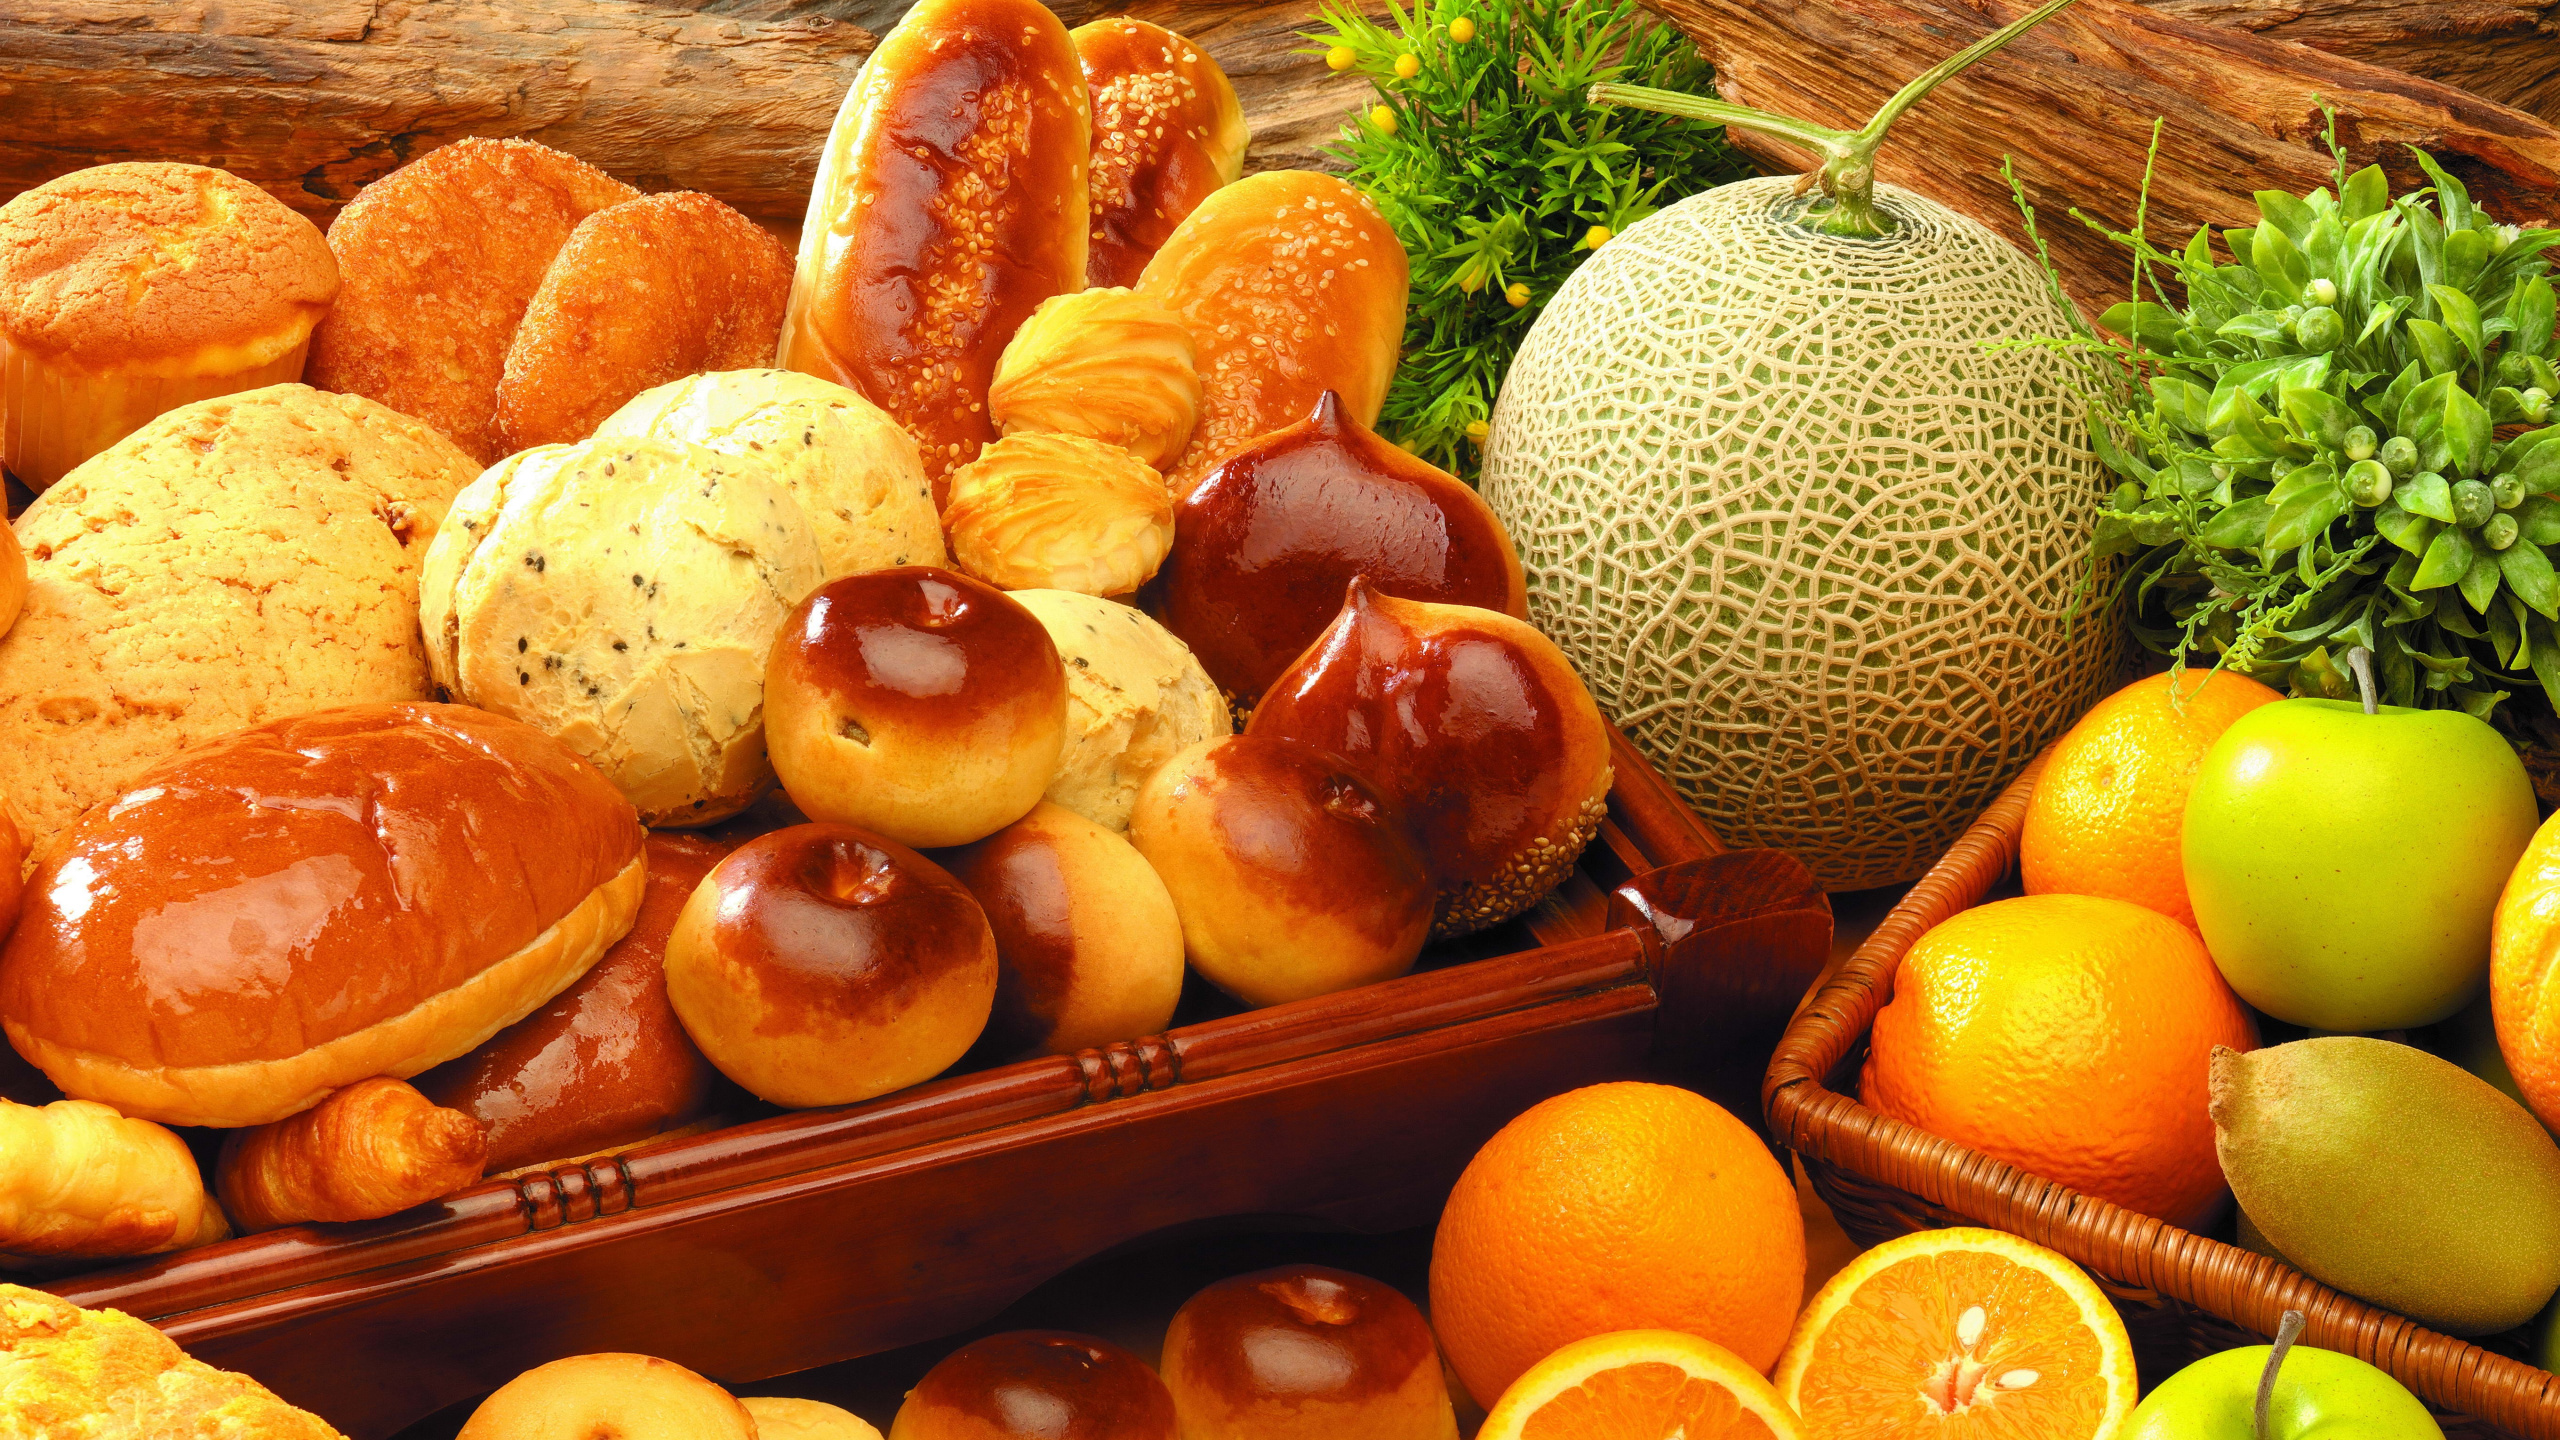 Orange Fruits on Brown Wooden Tray. Wallpaper in 2560x1440 Resolution